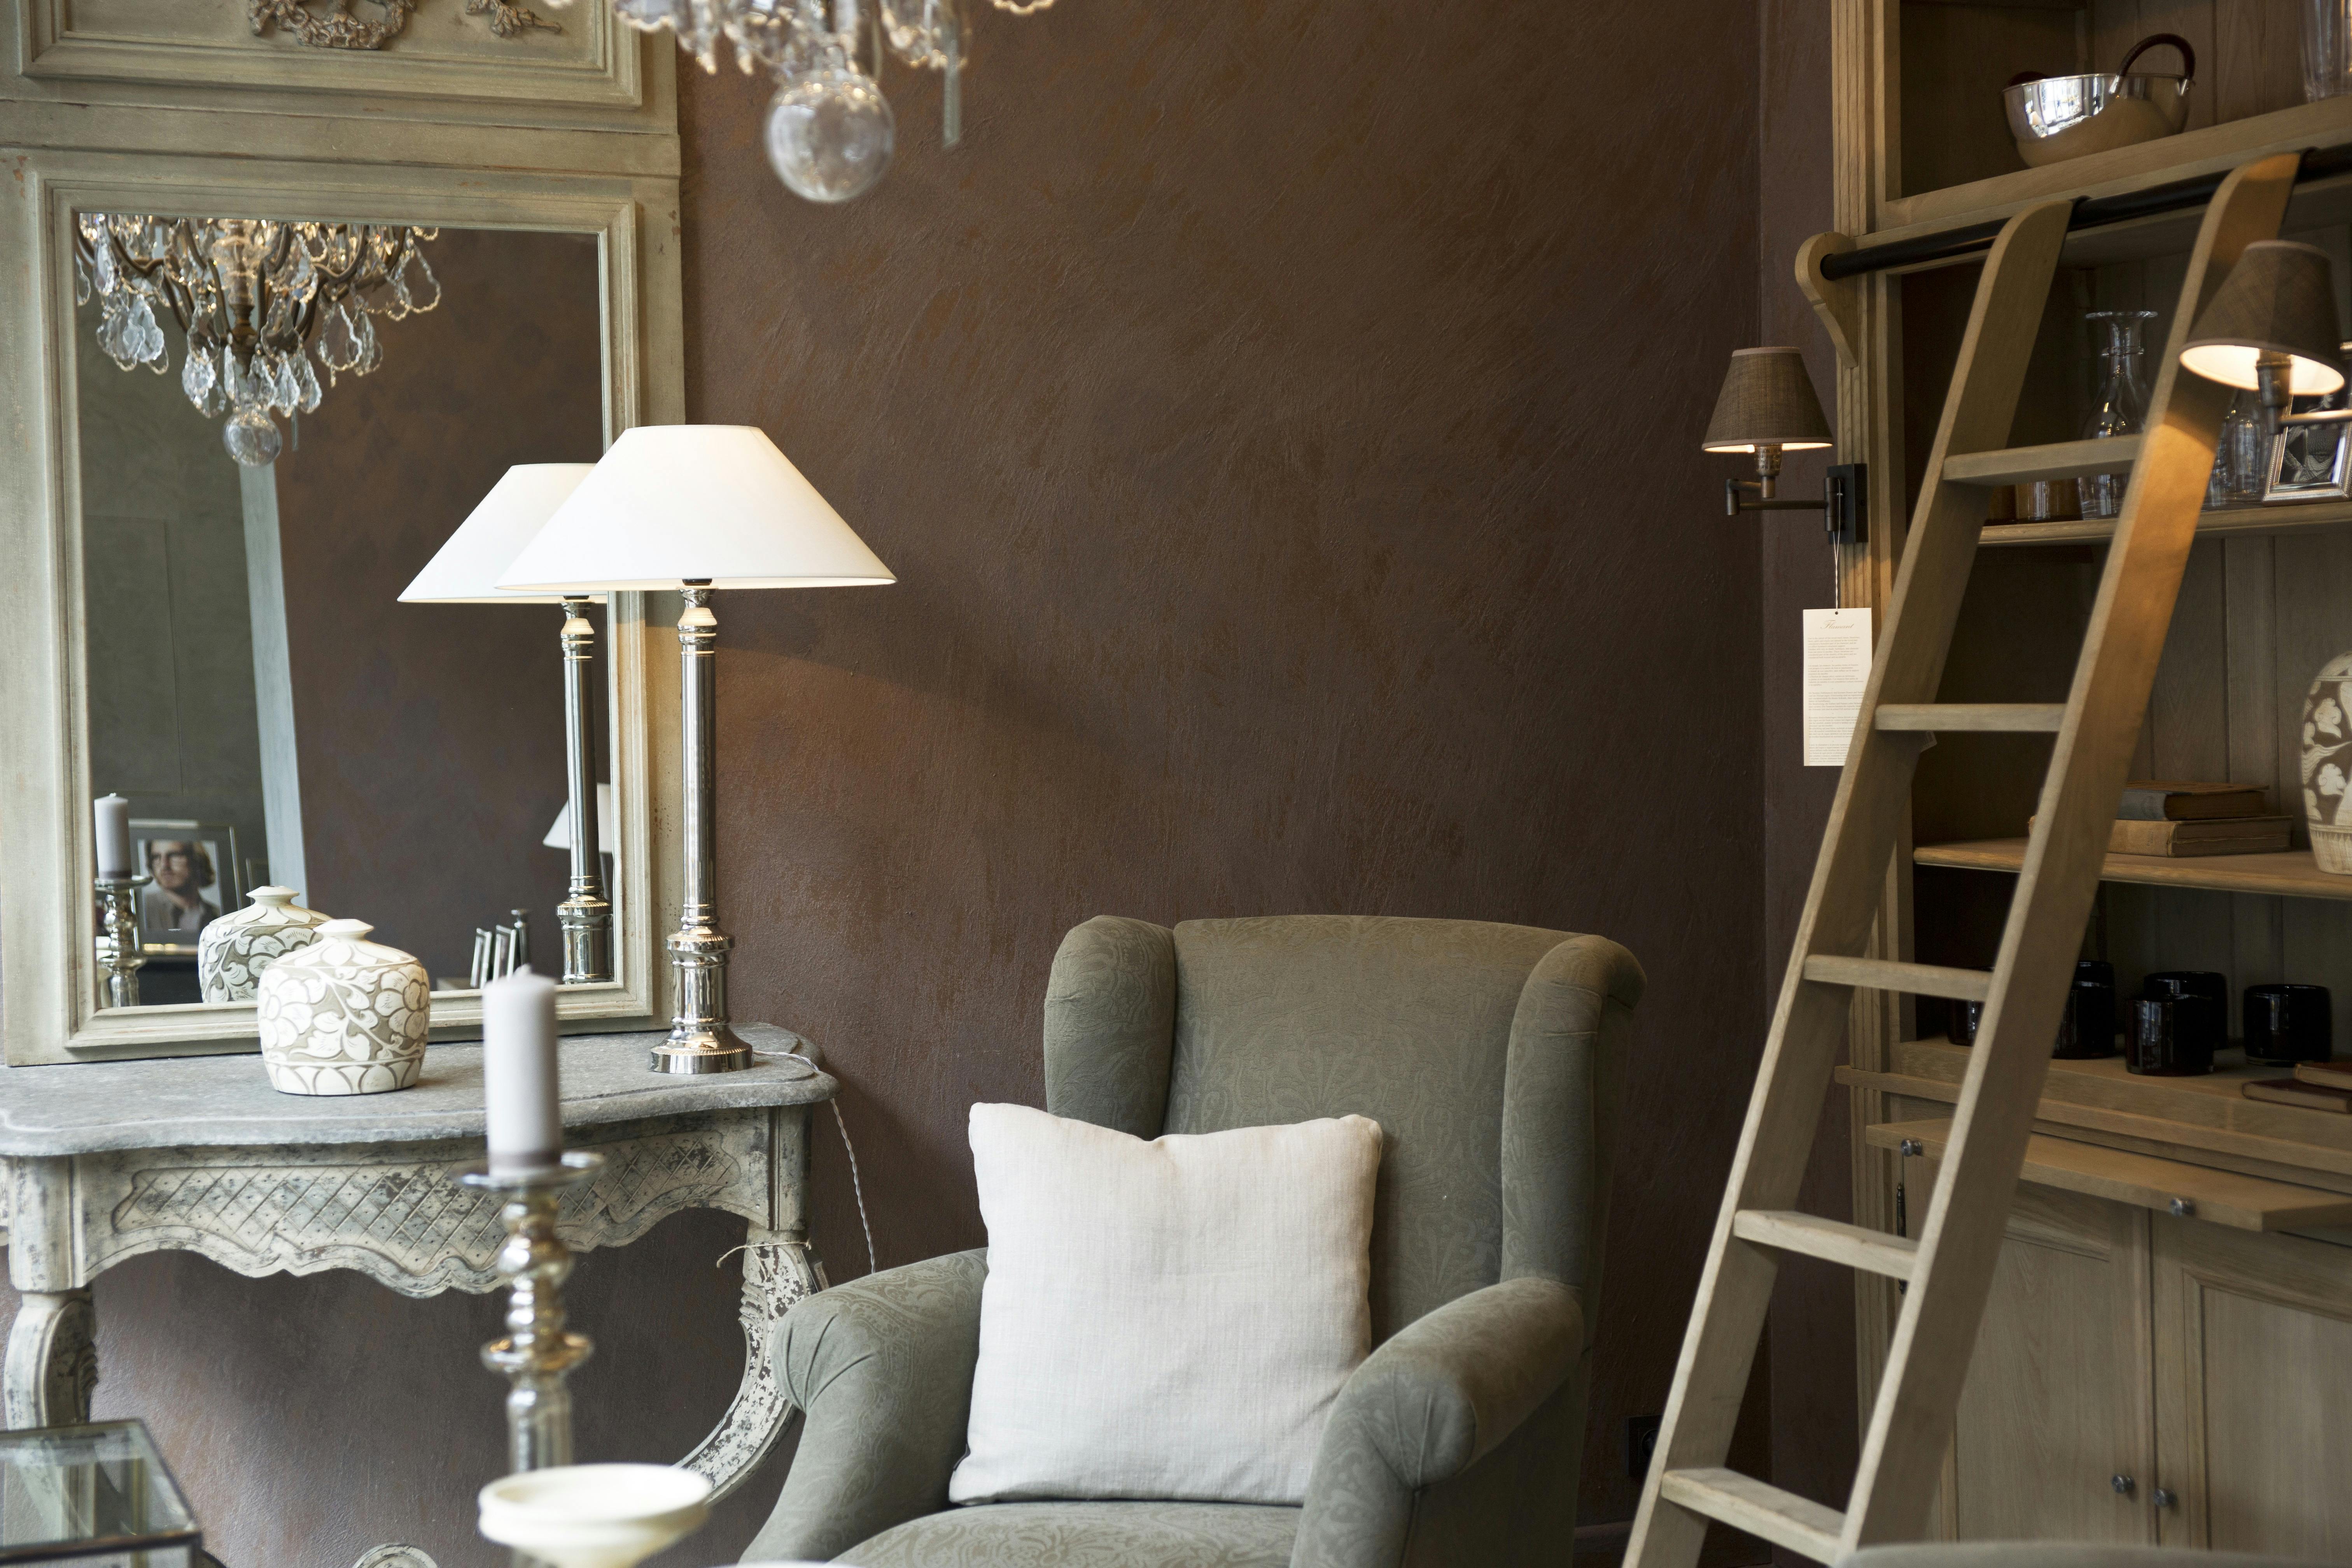 a chair, a mirror, and a lamp, making perfect home décor.